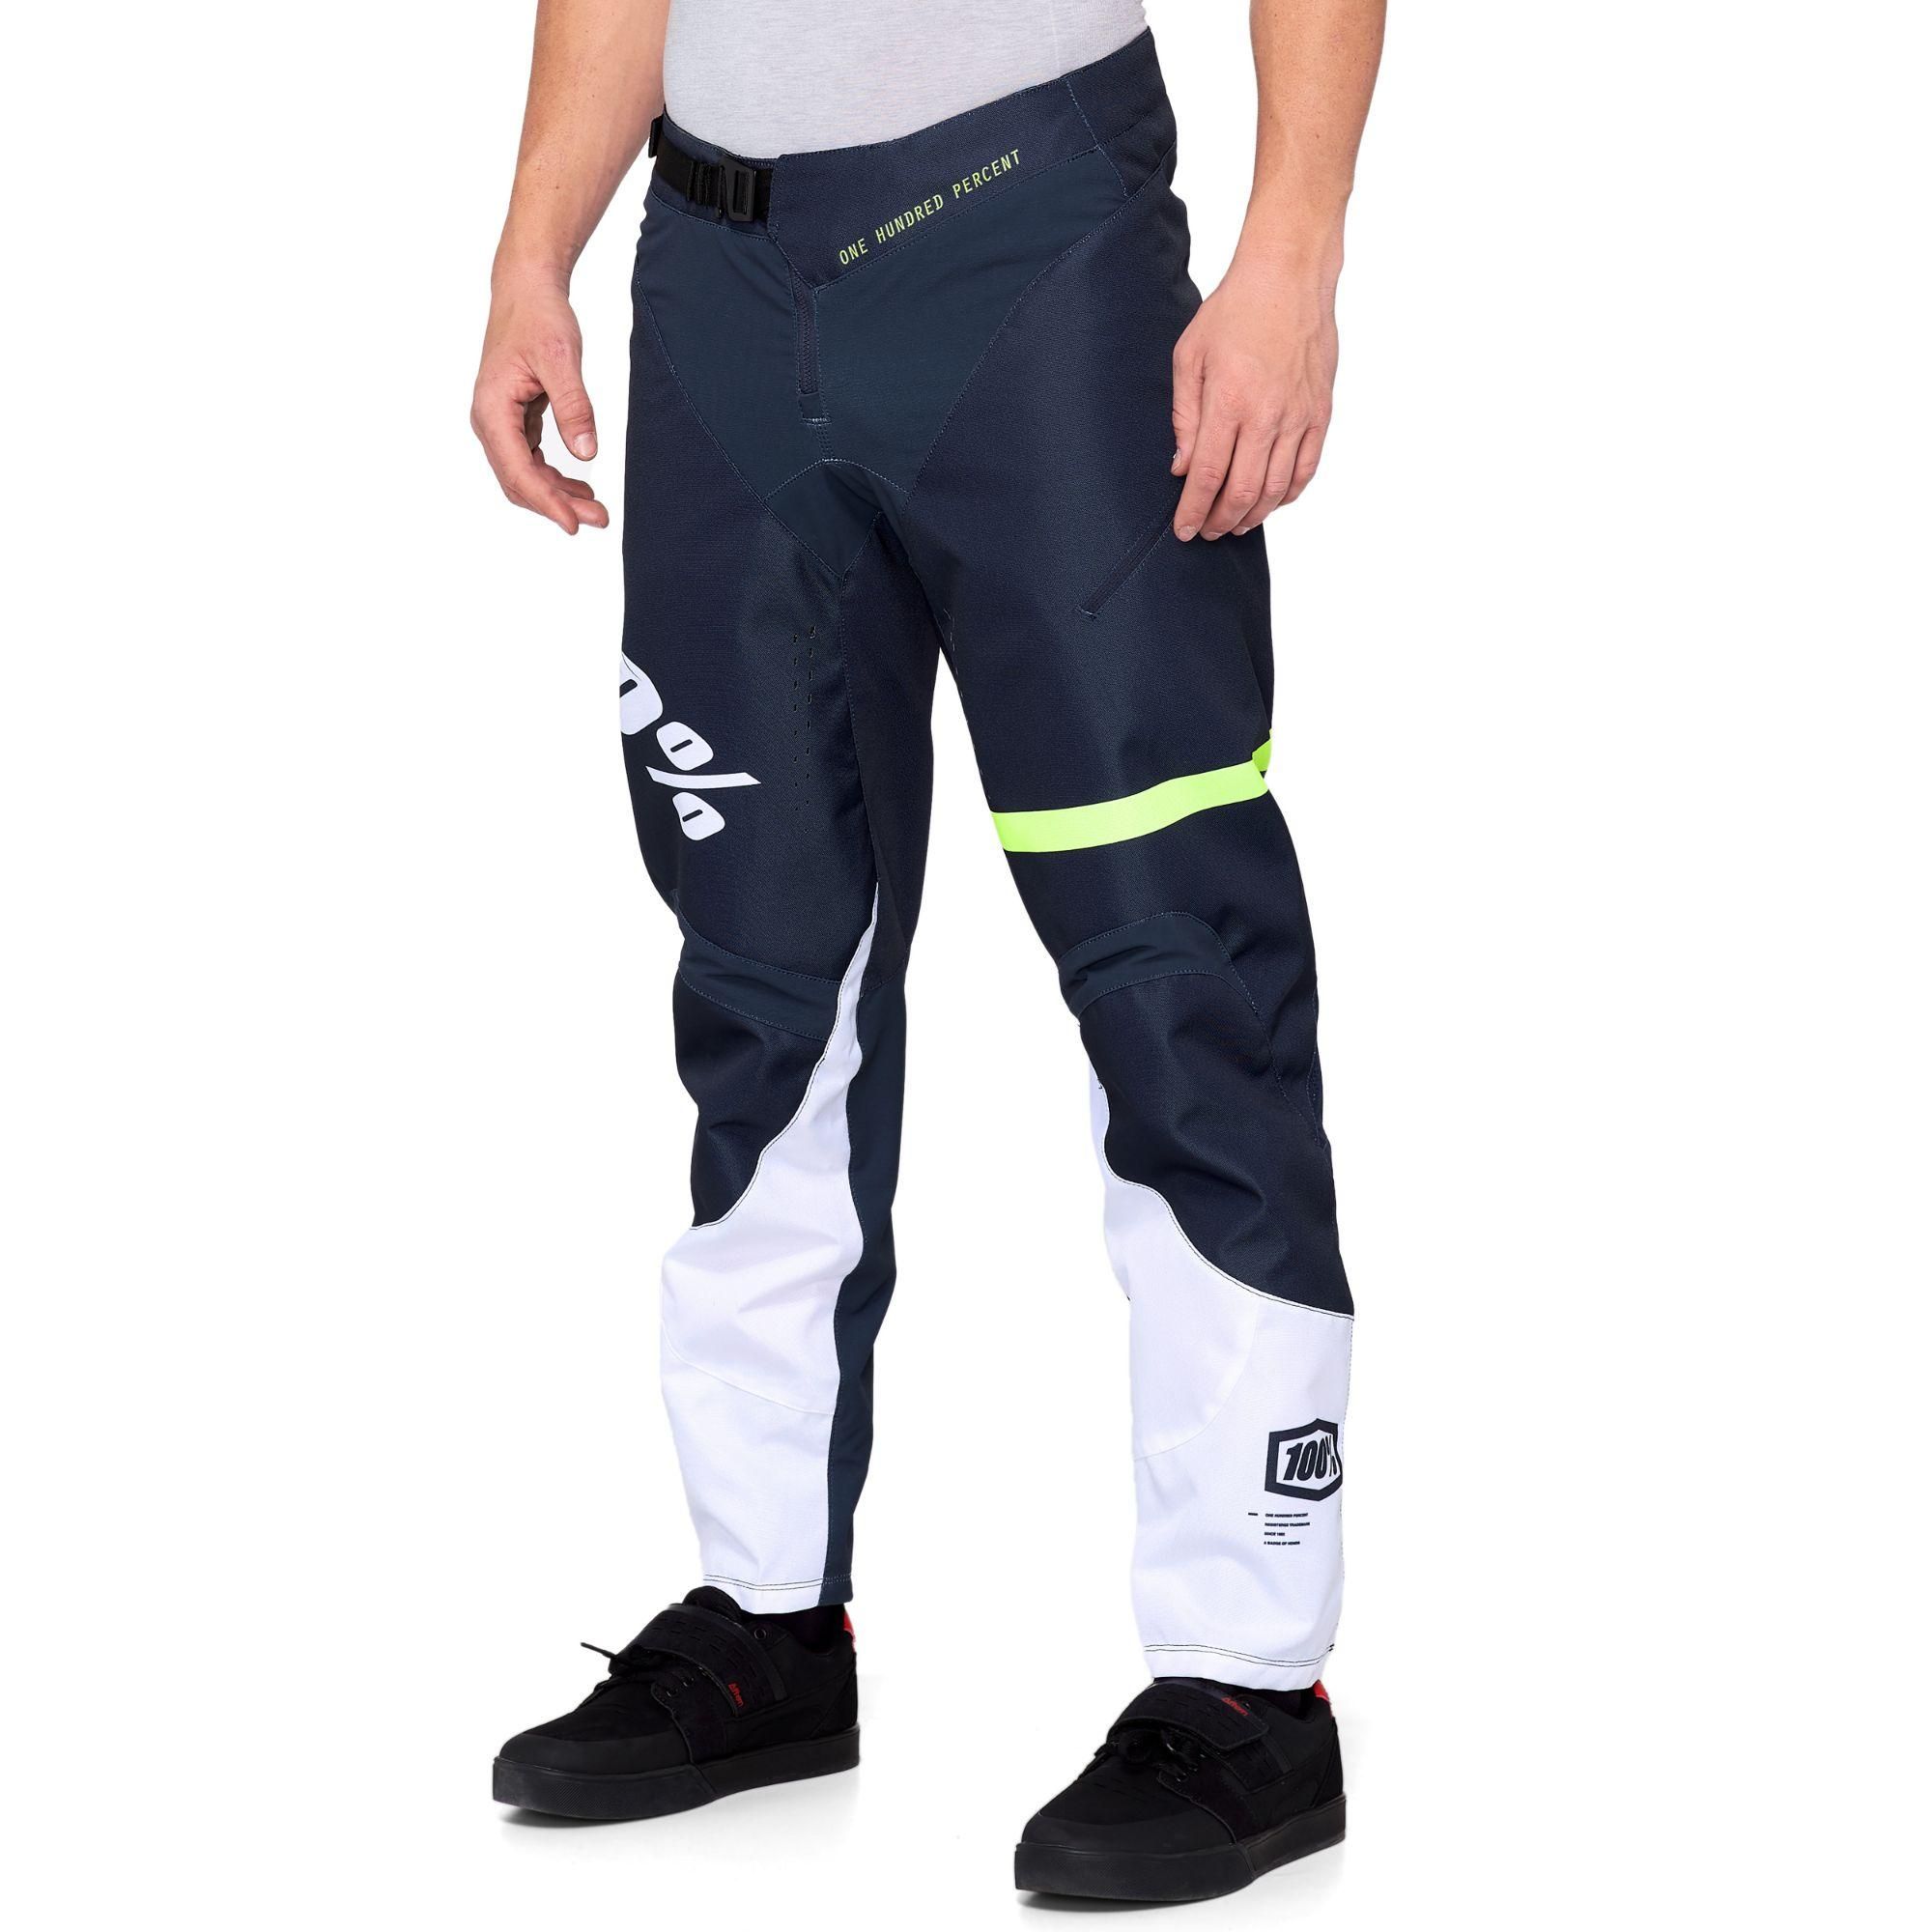 Dirección salud Triturado 100% R-CORE Downhill Pants Size 30" Only - £59.99 | Trousers | Cyclestore